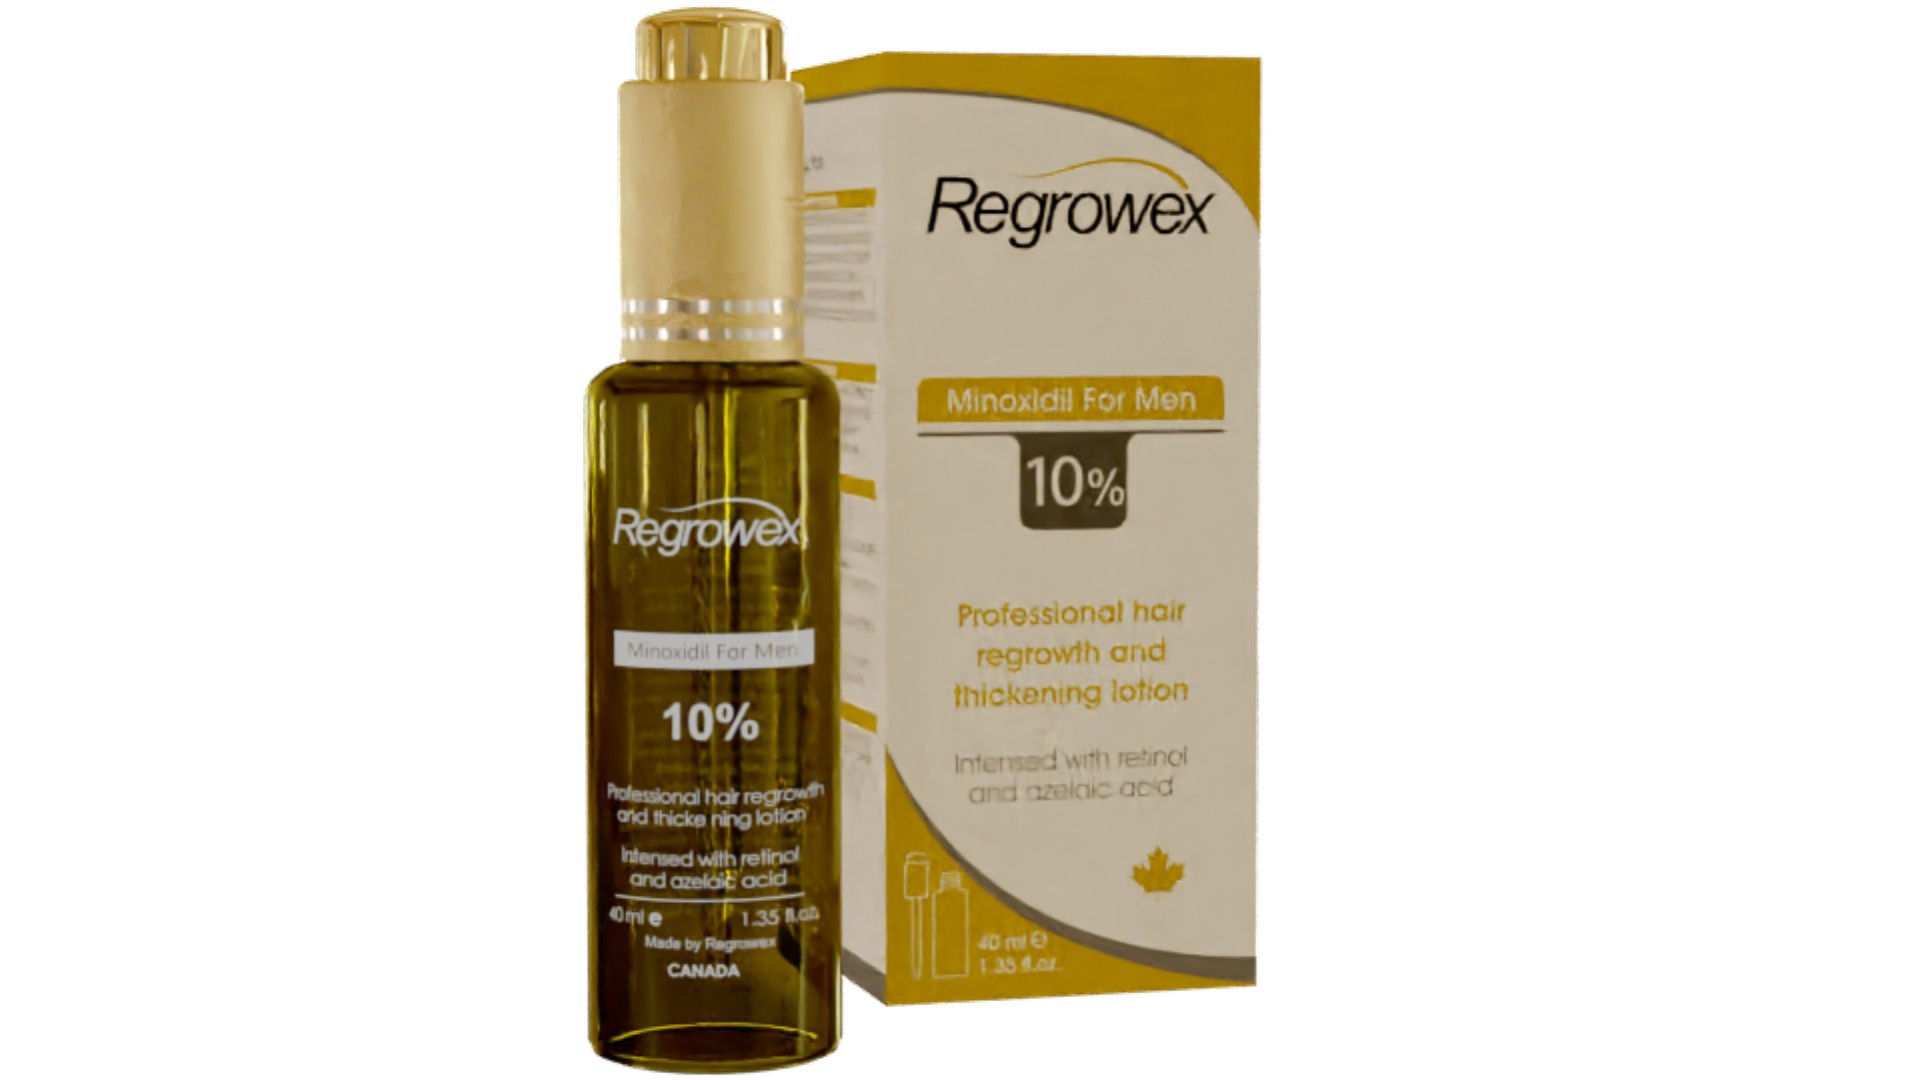 regrowex minoxidil solution 10% bottle with box